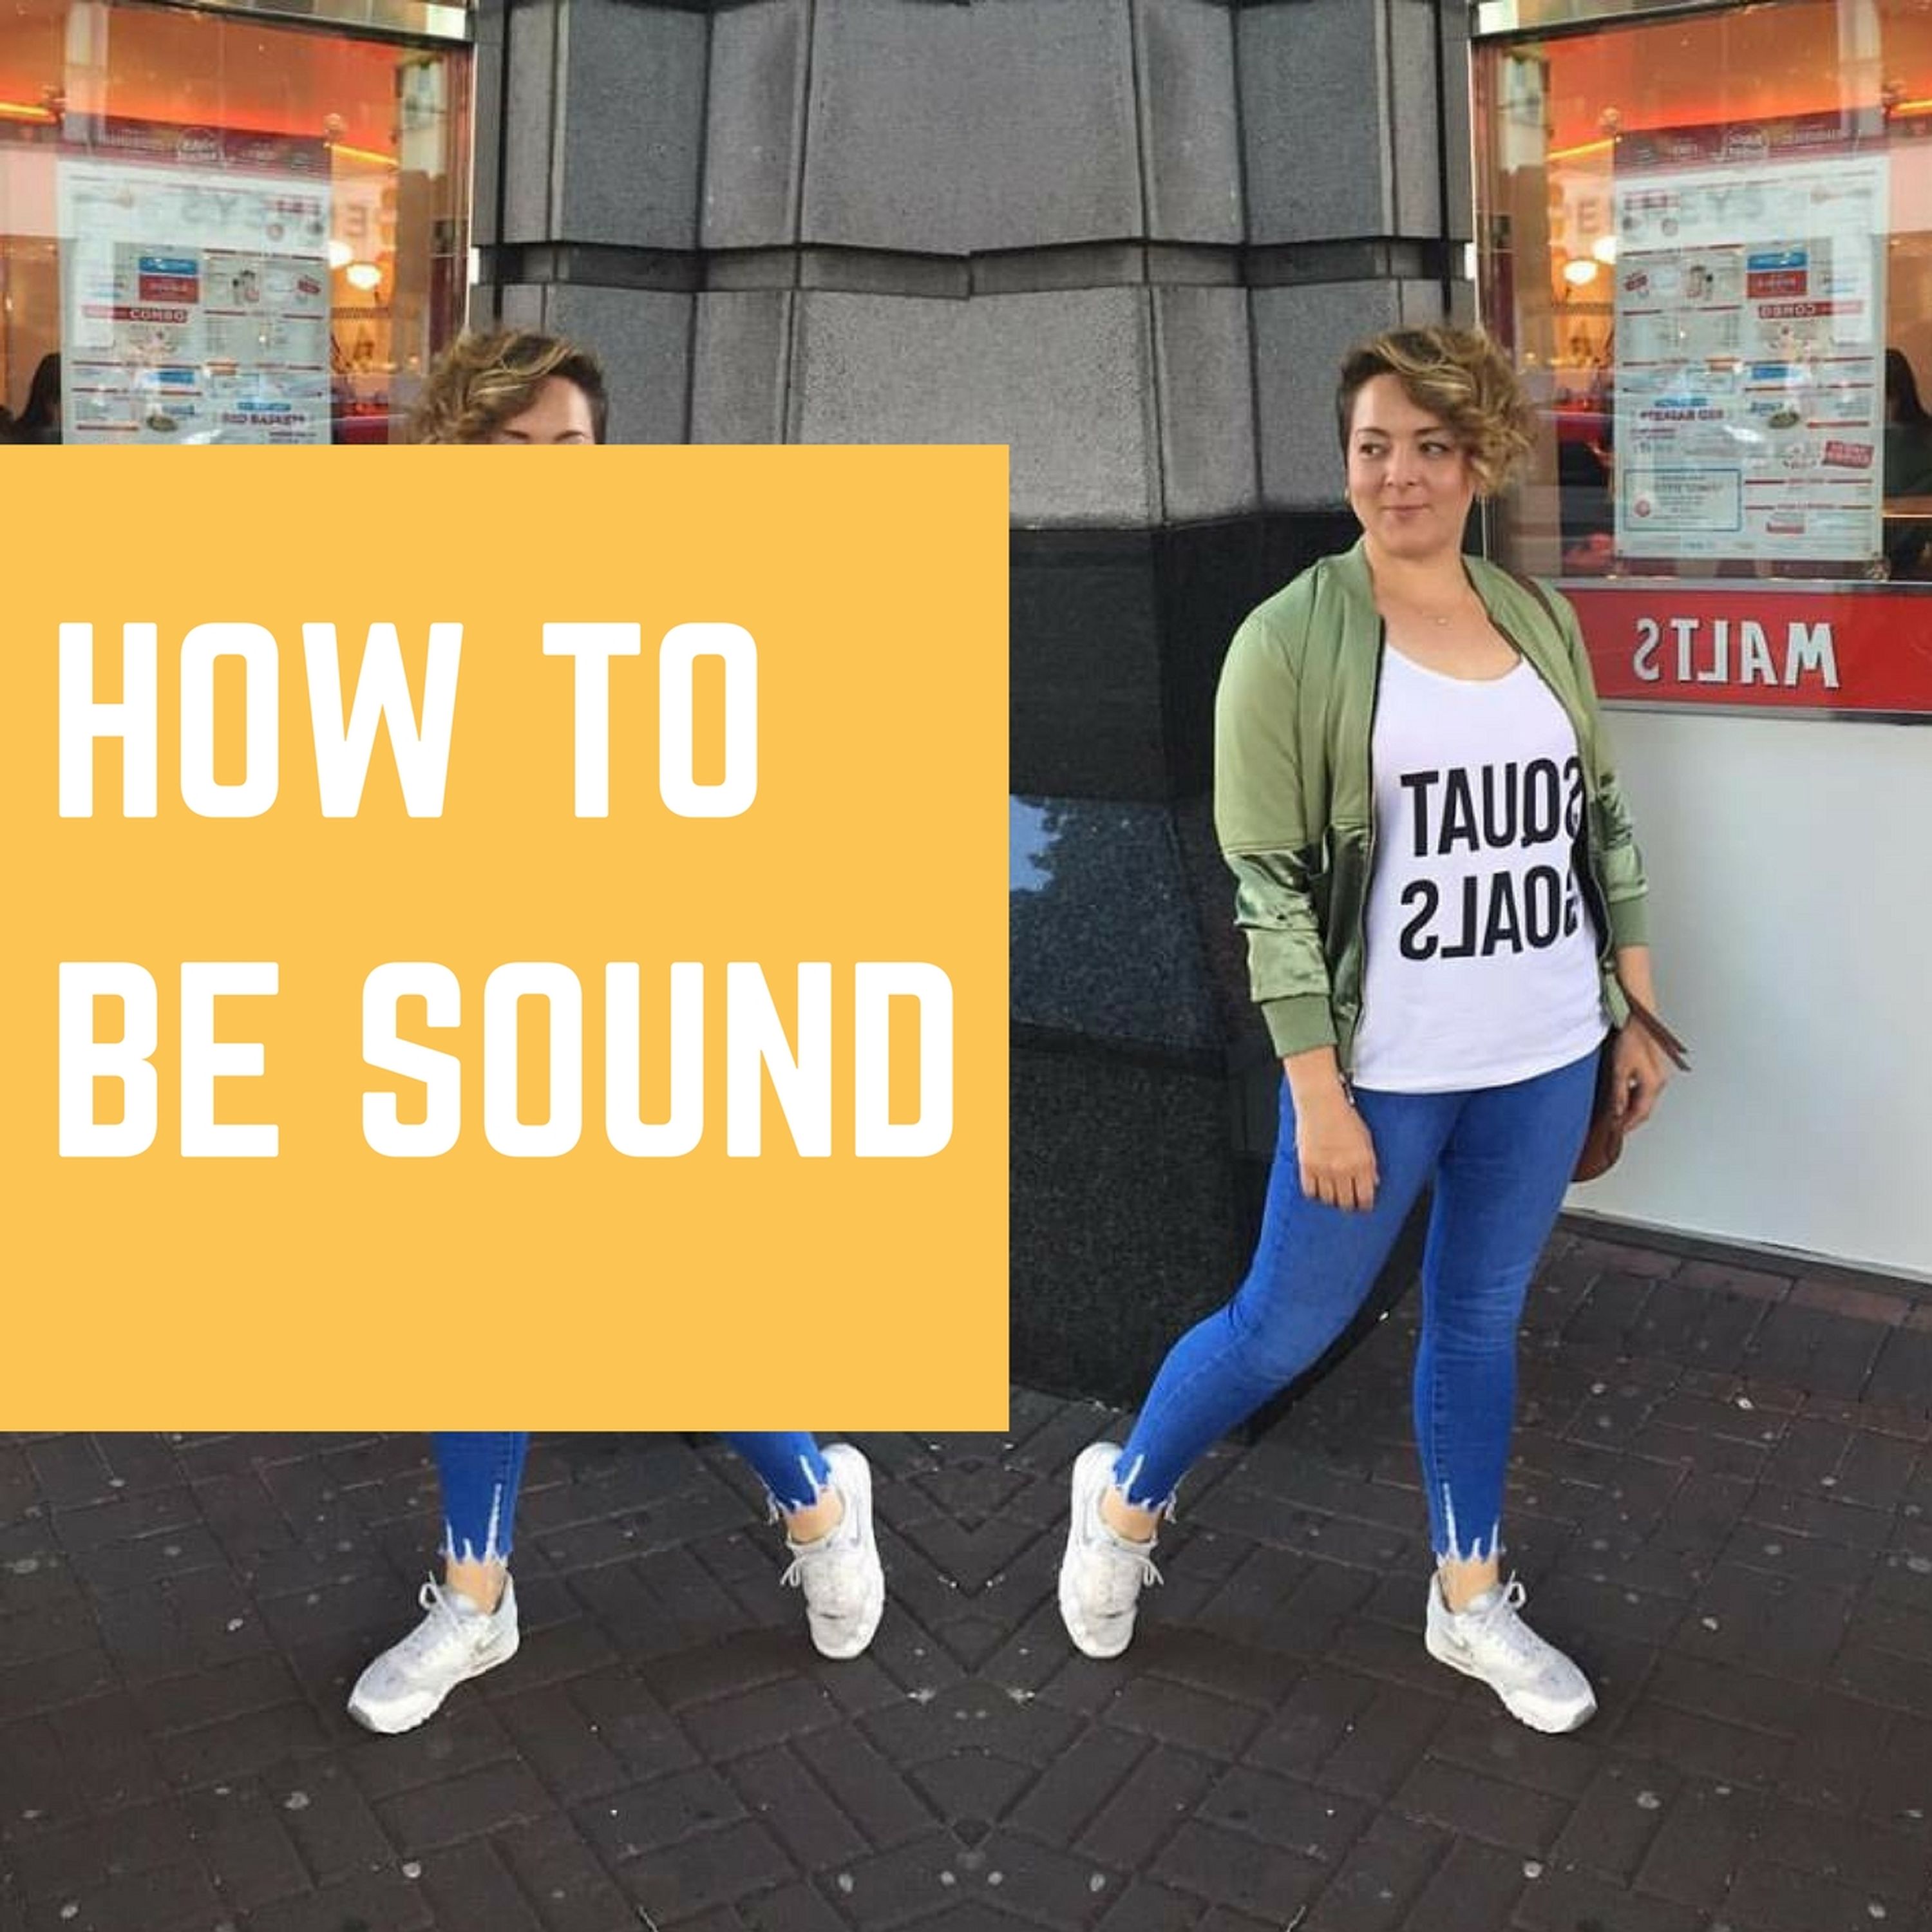 Joanne McNally on how to be sound